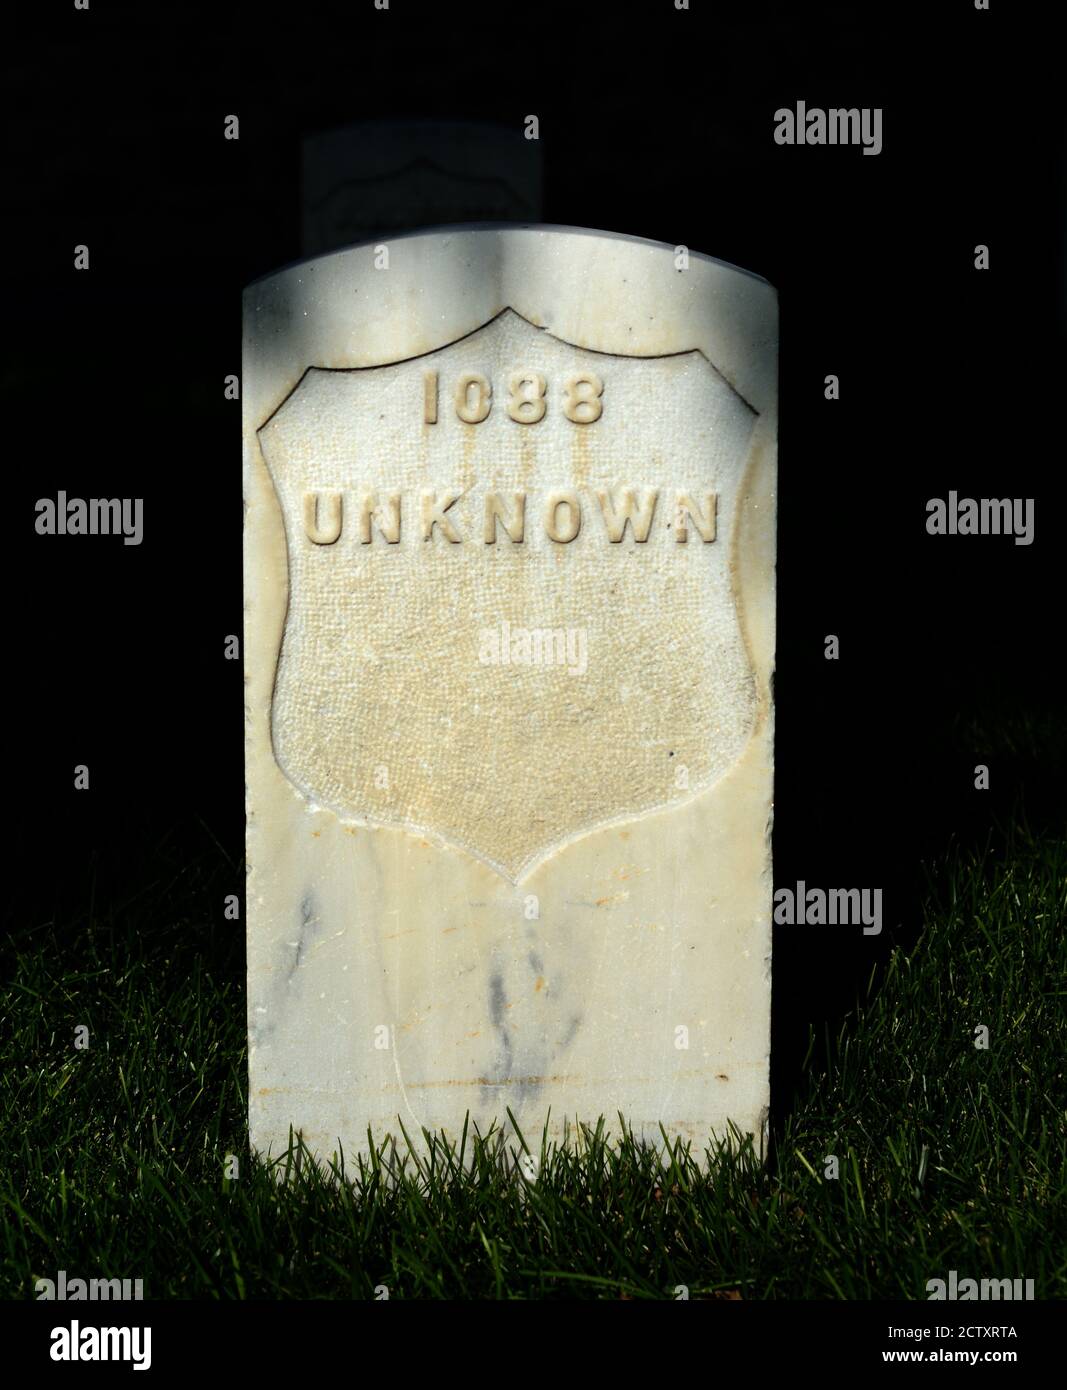 A 19th century tombstone marks the grave of an unknown person buried at Santa Fe National Cemetery in Santa Fe, New Mexico. Stock Photo